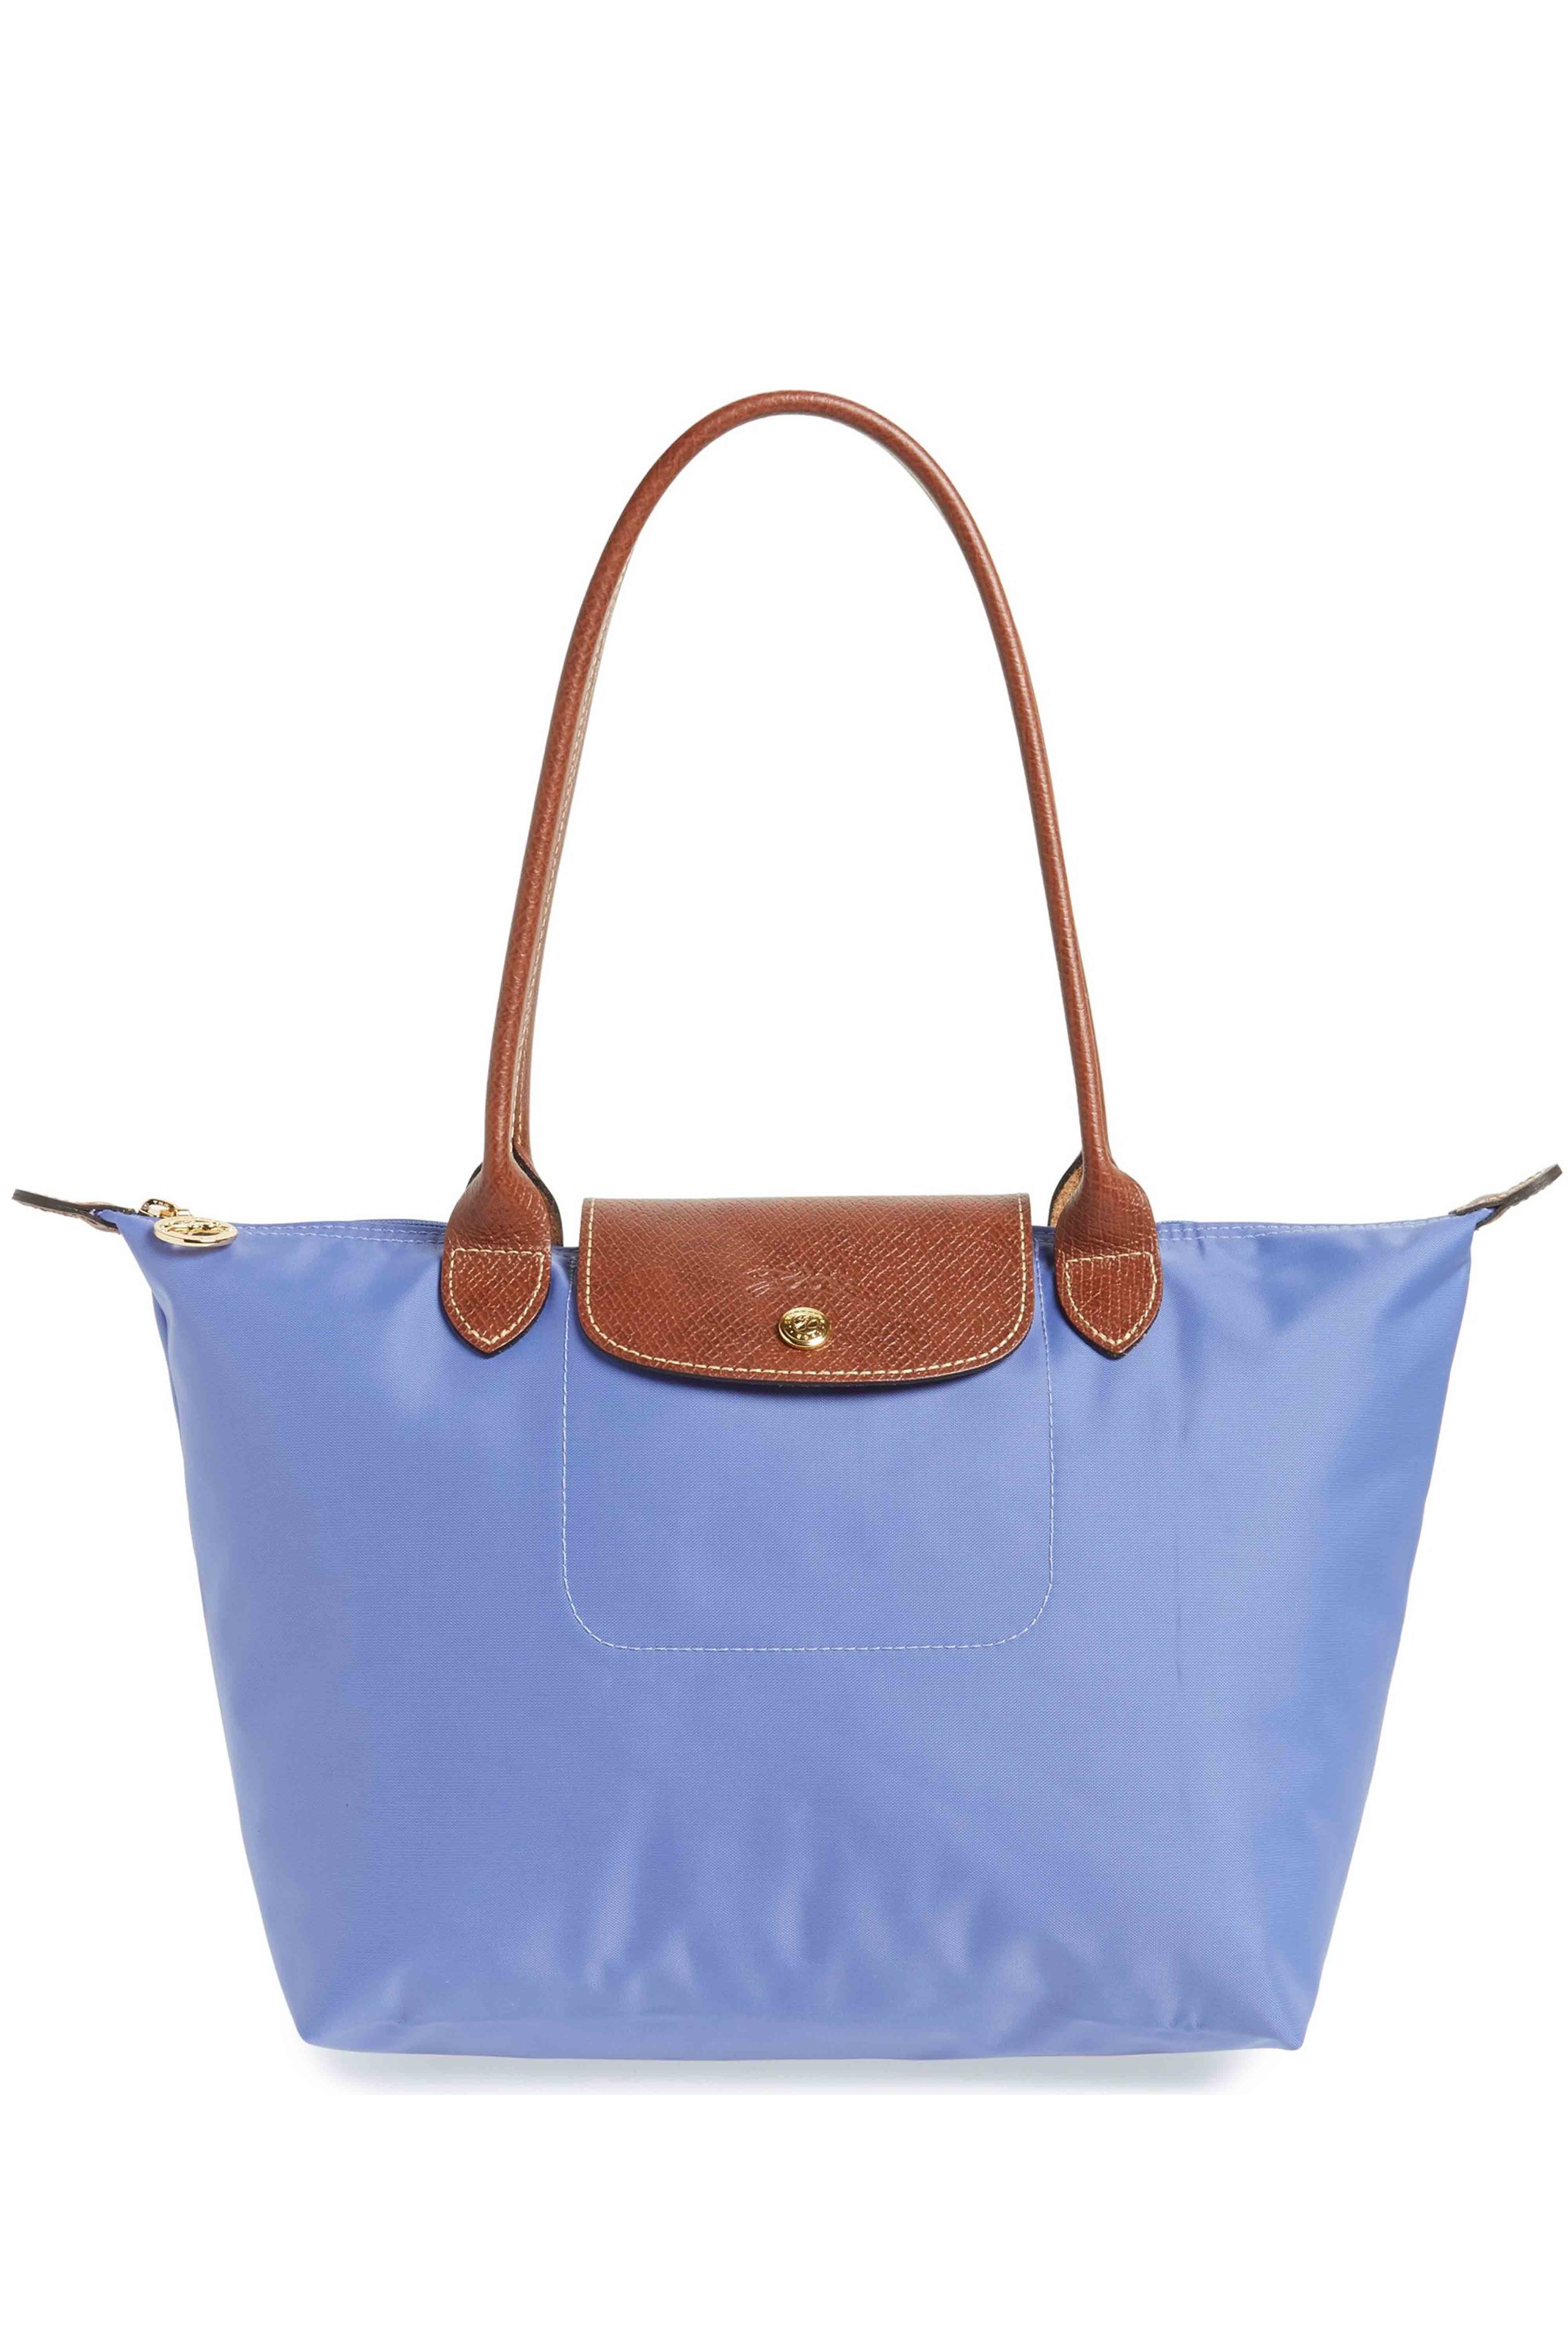 where to buy longchamps bags